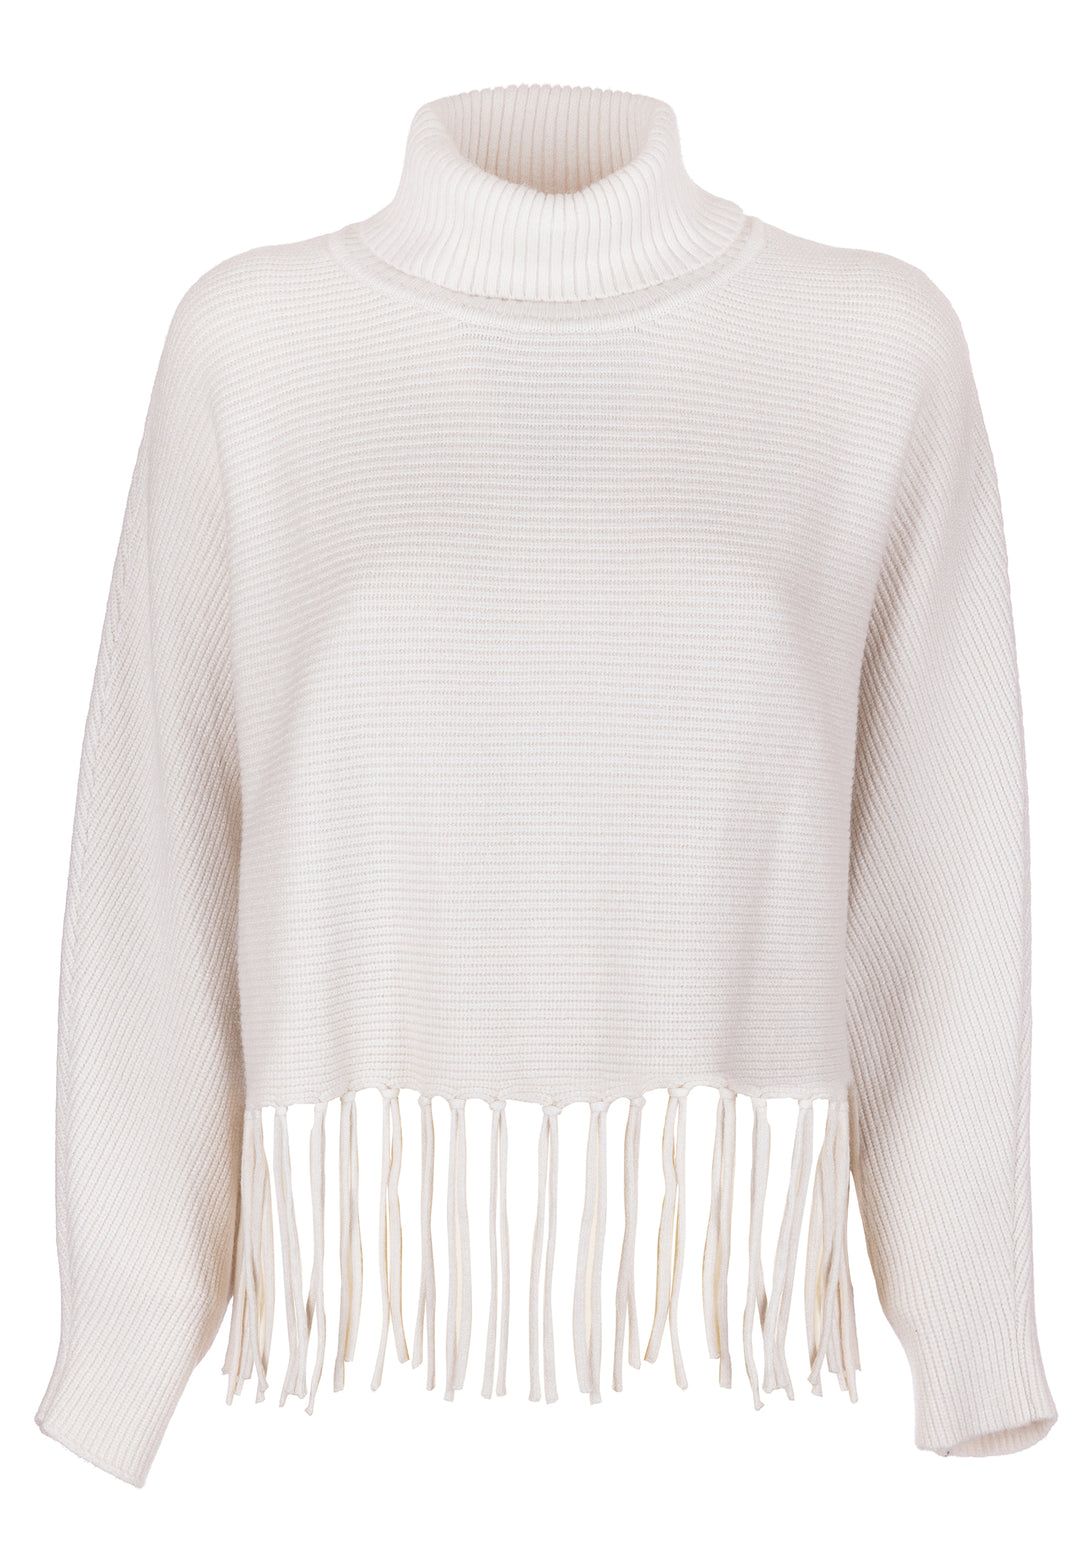 Knitwear over fit, cropped, with fringes at the bottom